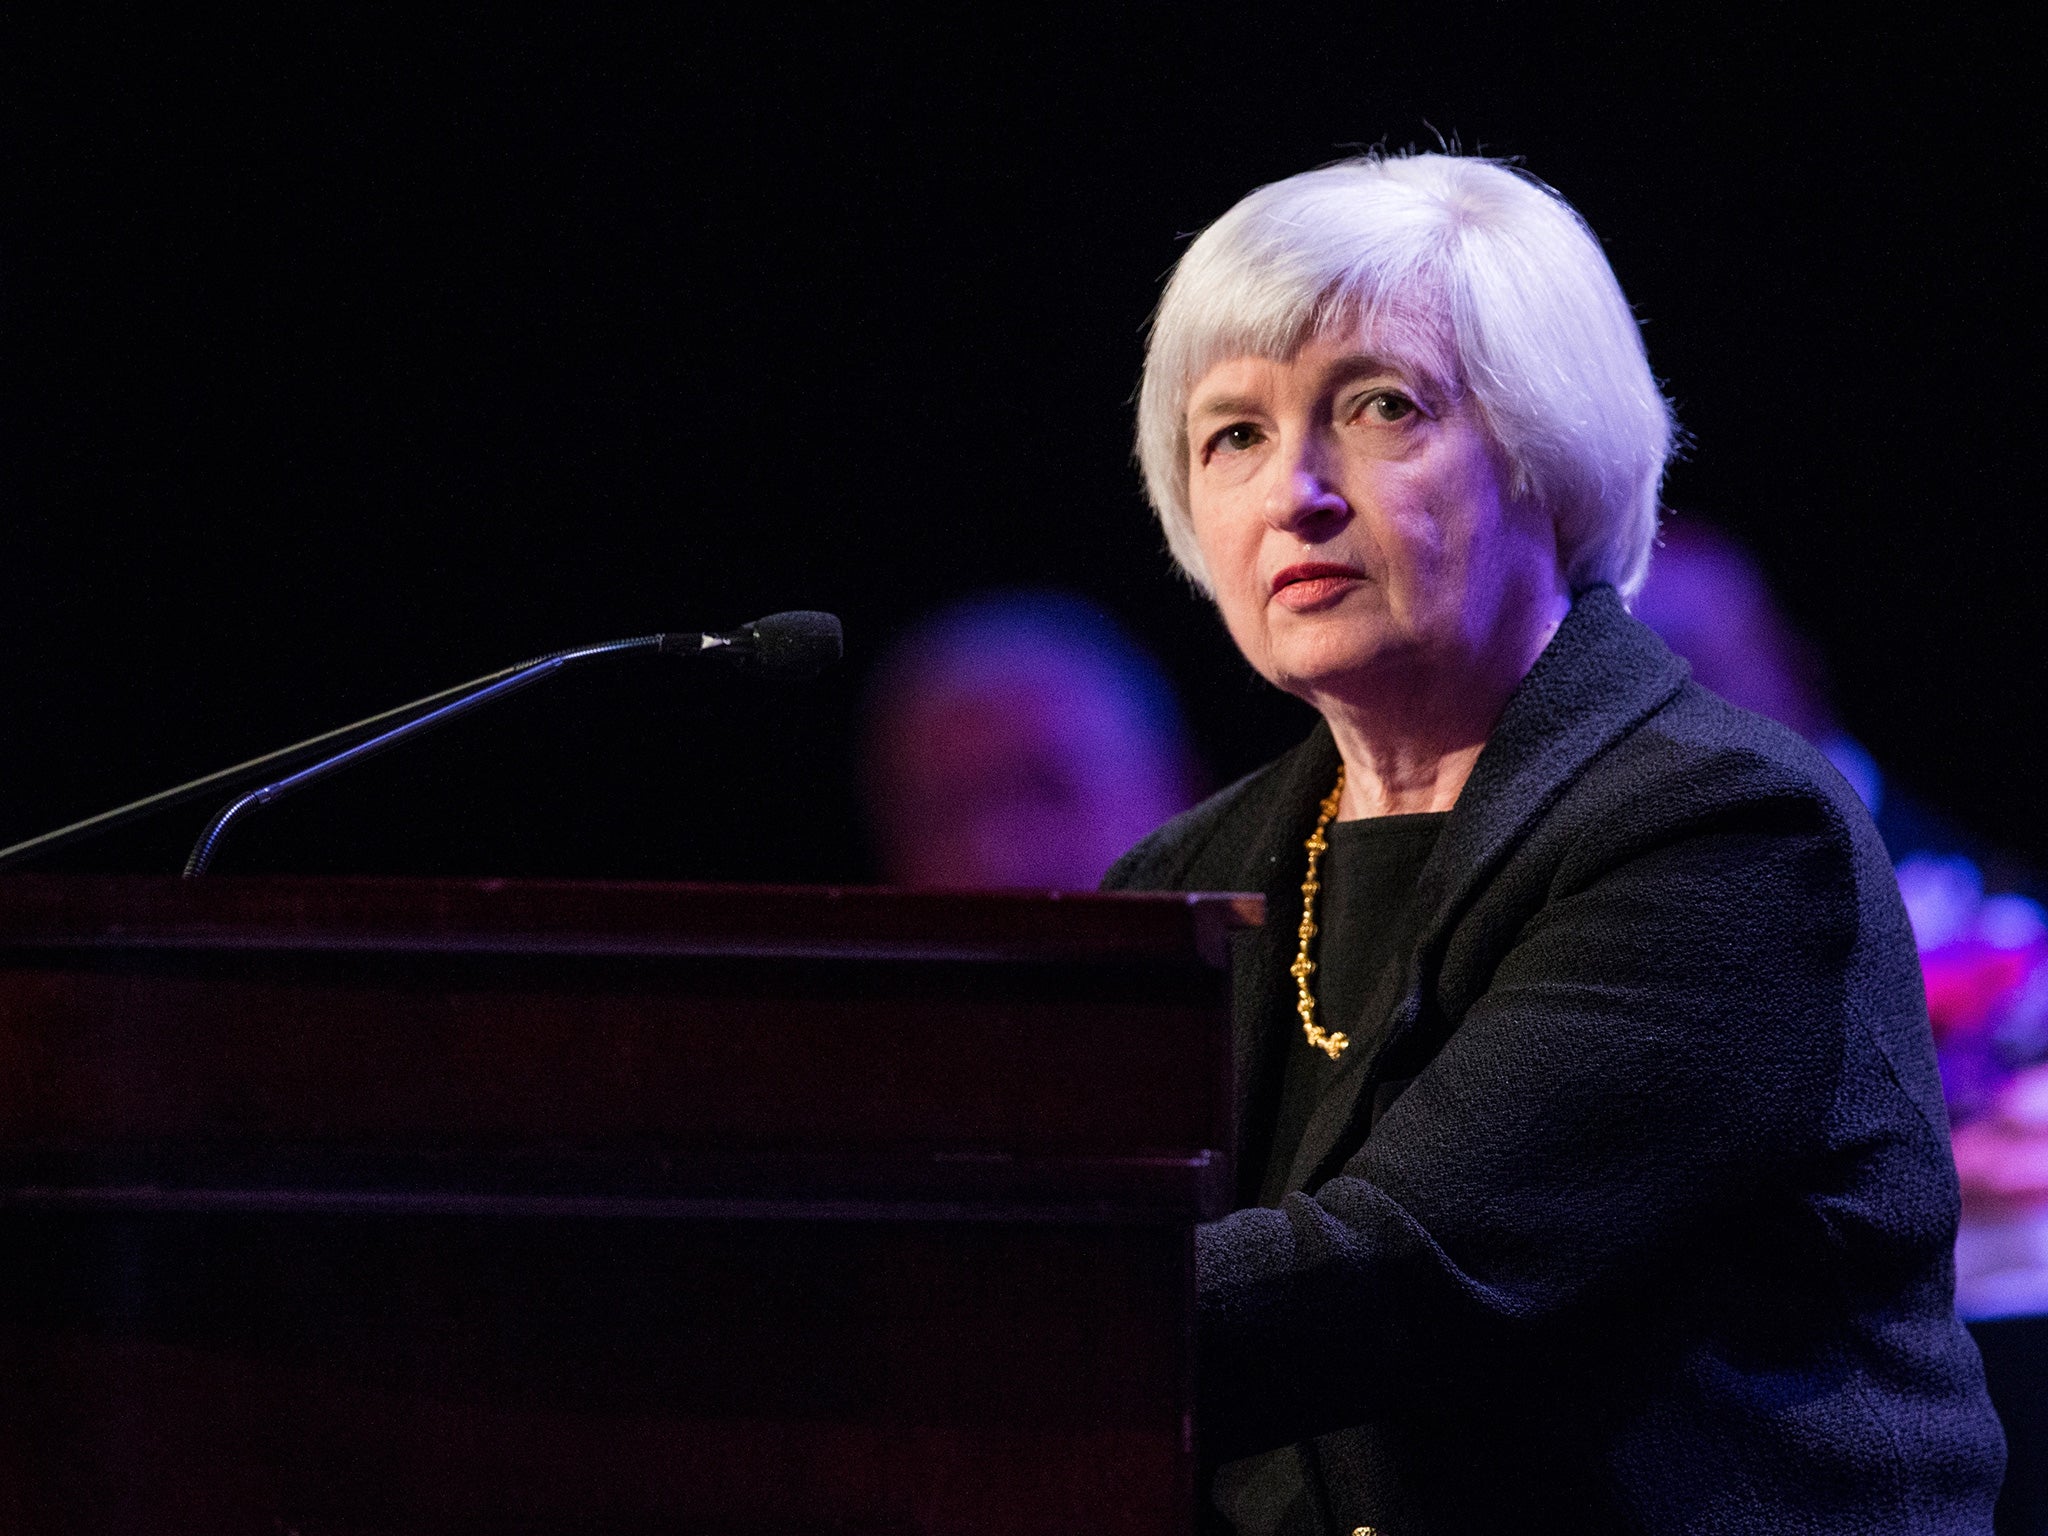 The weak dollar has led to speculation that Janet Yellen will not press ahead with a first rate hike since 2006